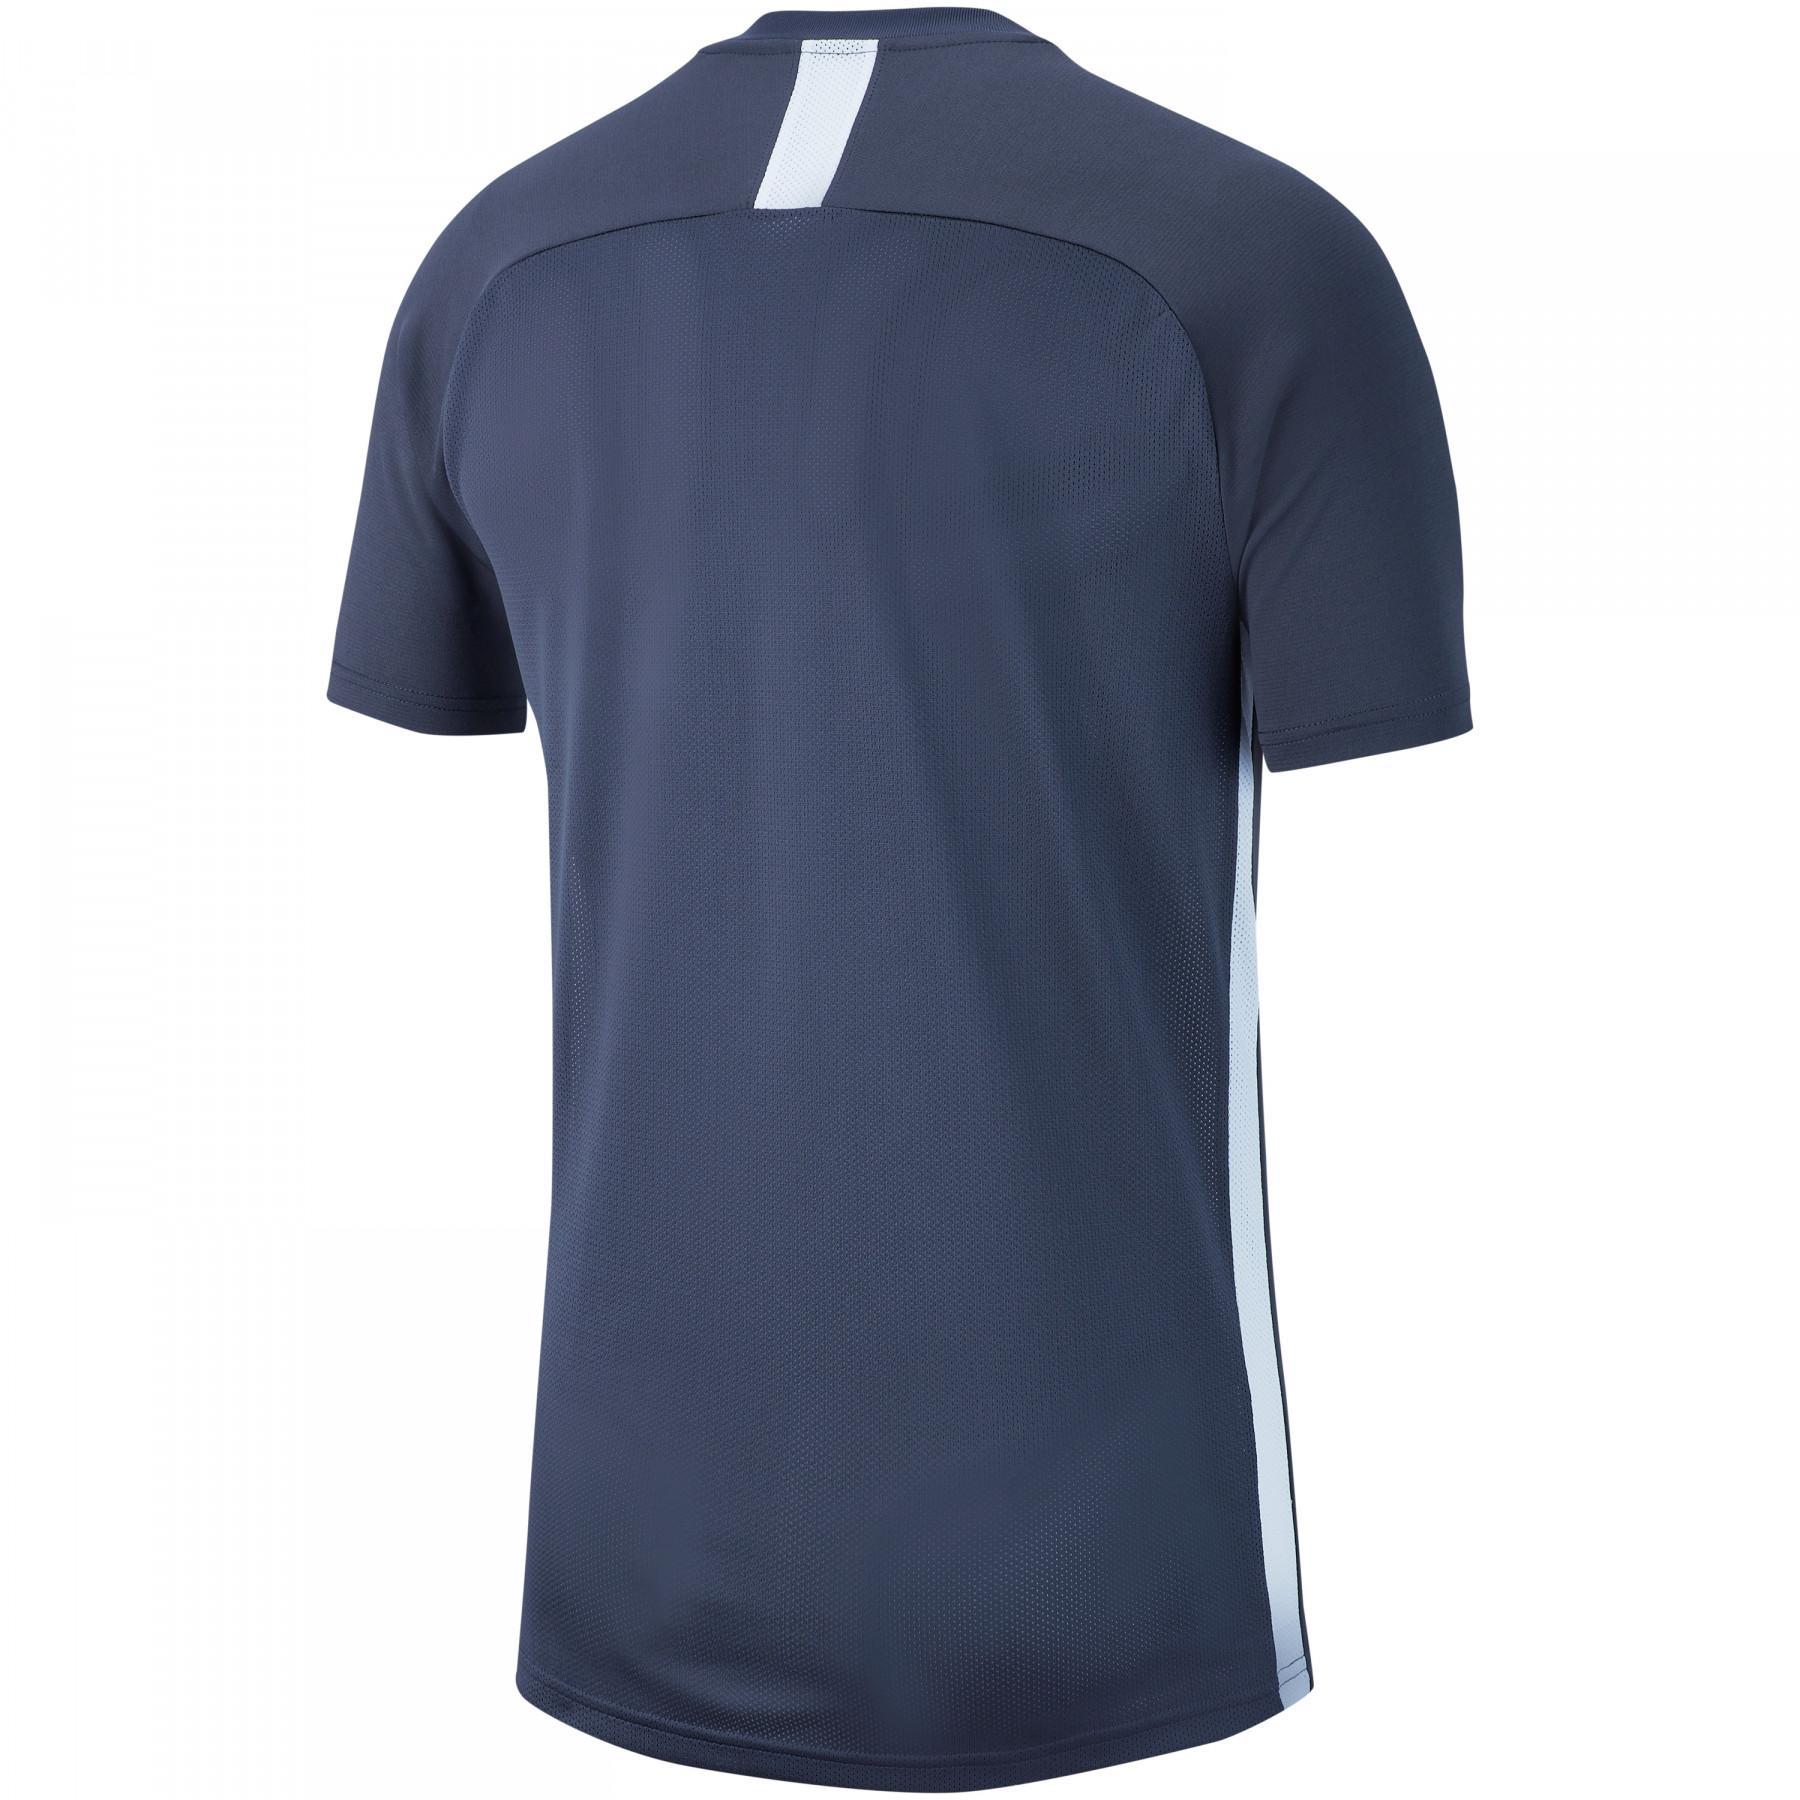 Maillot Nike Dri-FIT Academy19